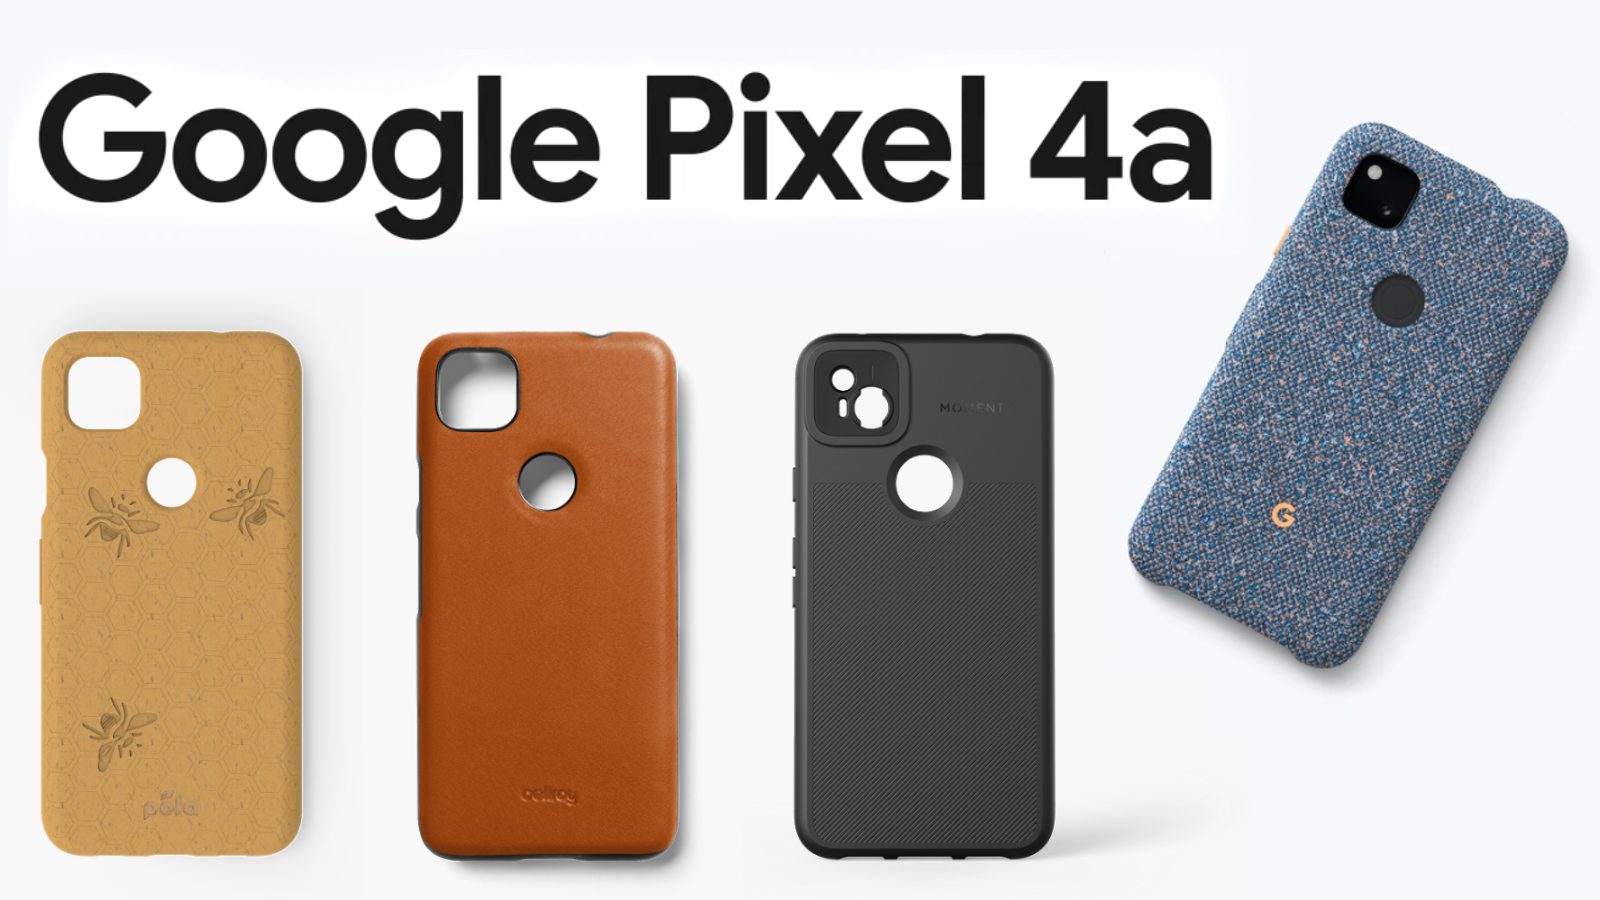 These are all the Pixel 4a cases you can buy from Google right now